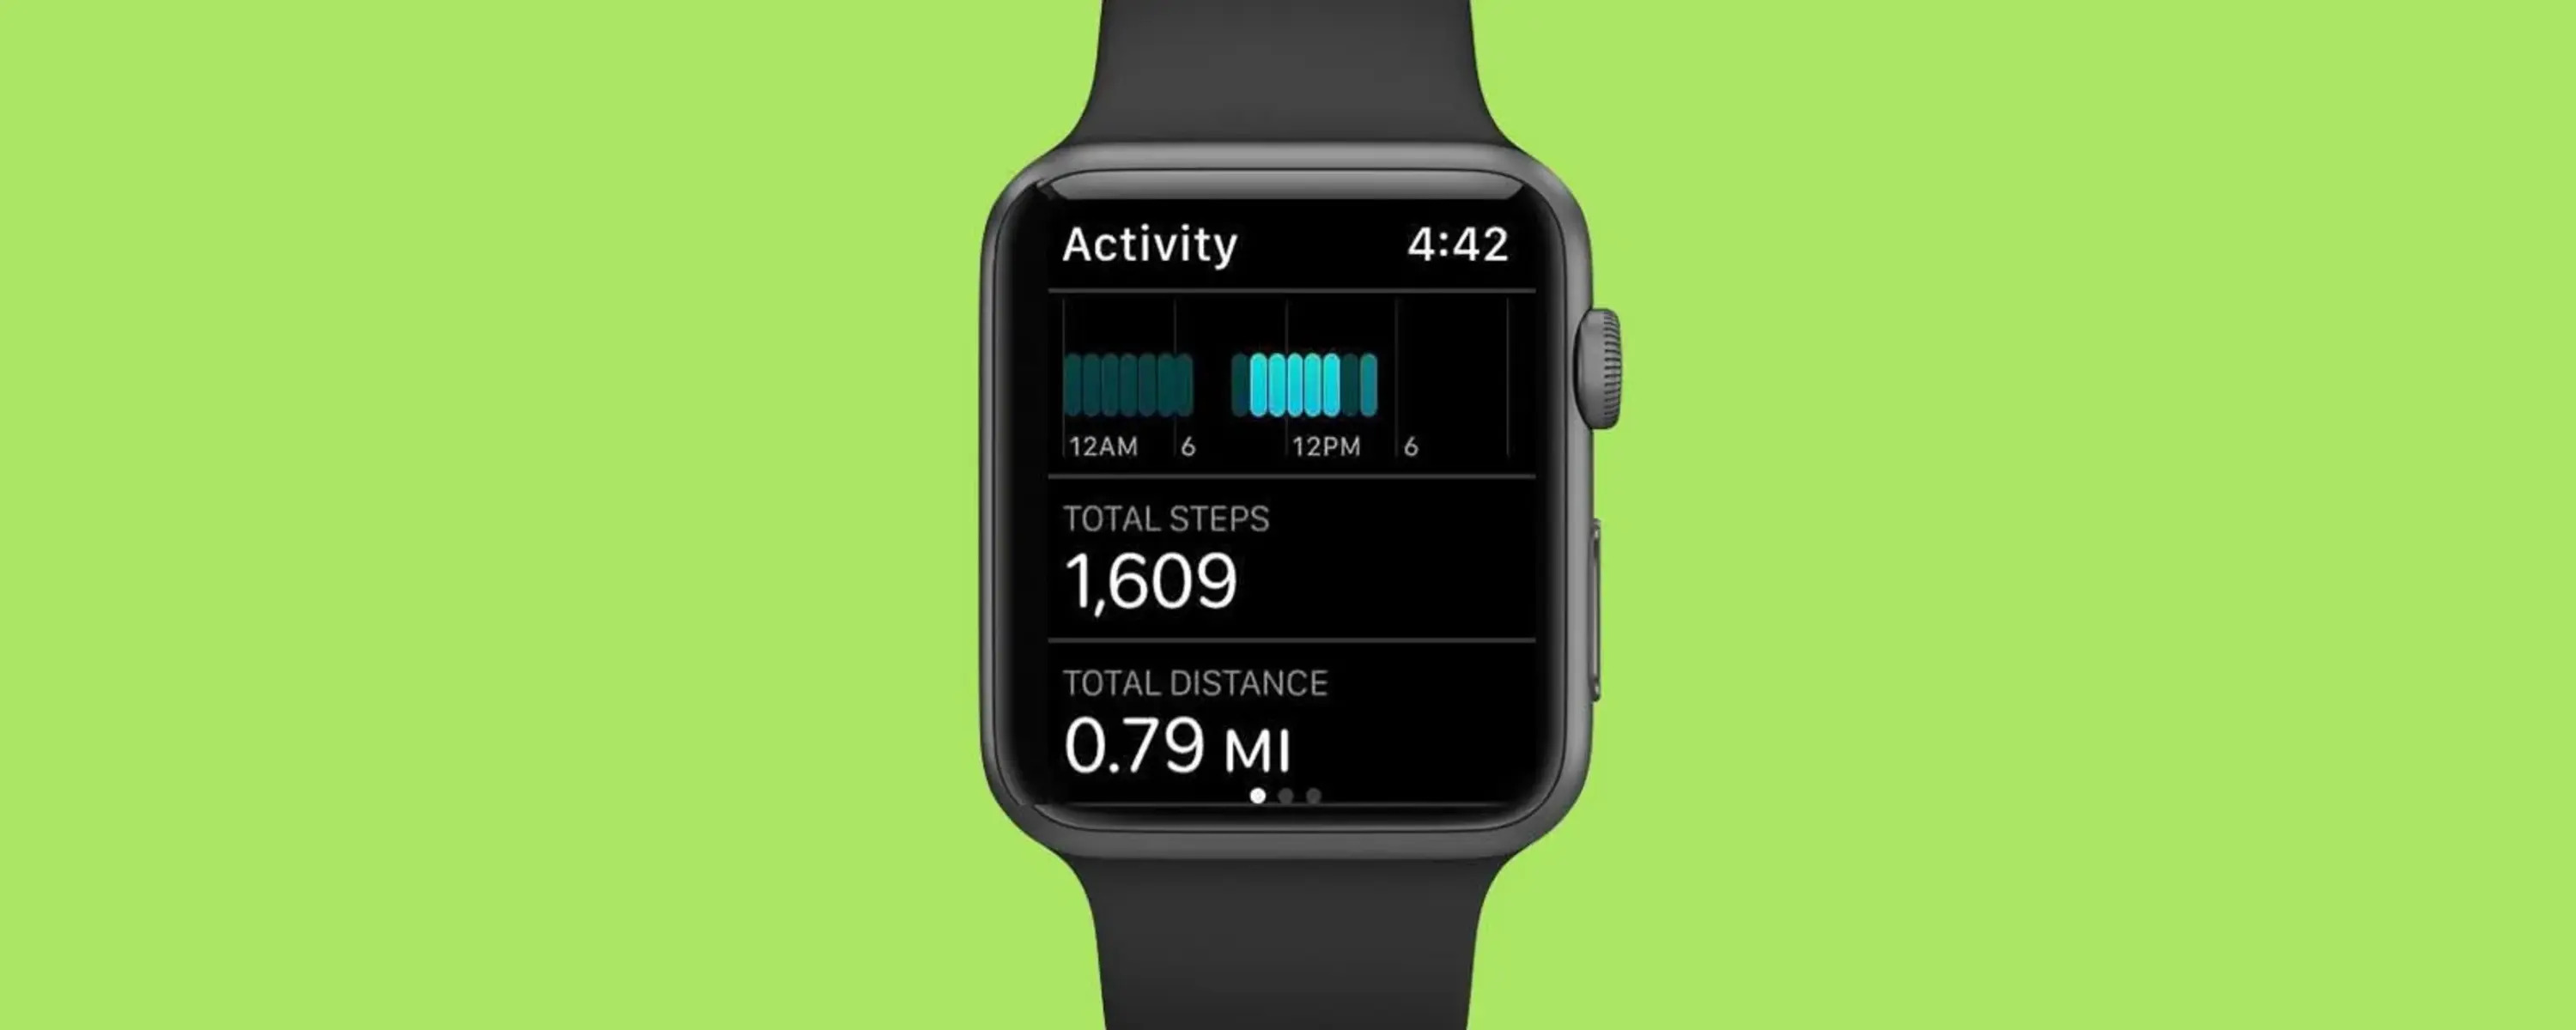 Apple Watch Not Tracking Steps? There’s A Fix For That